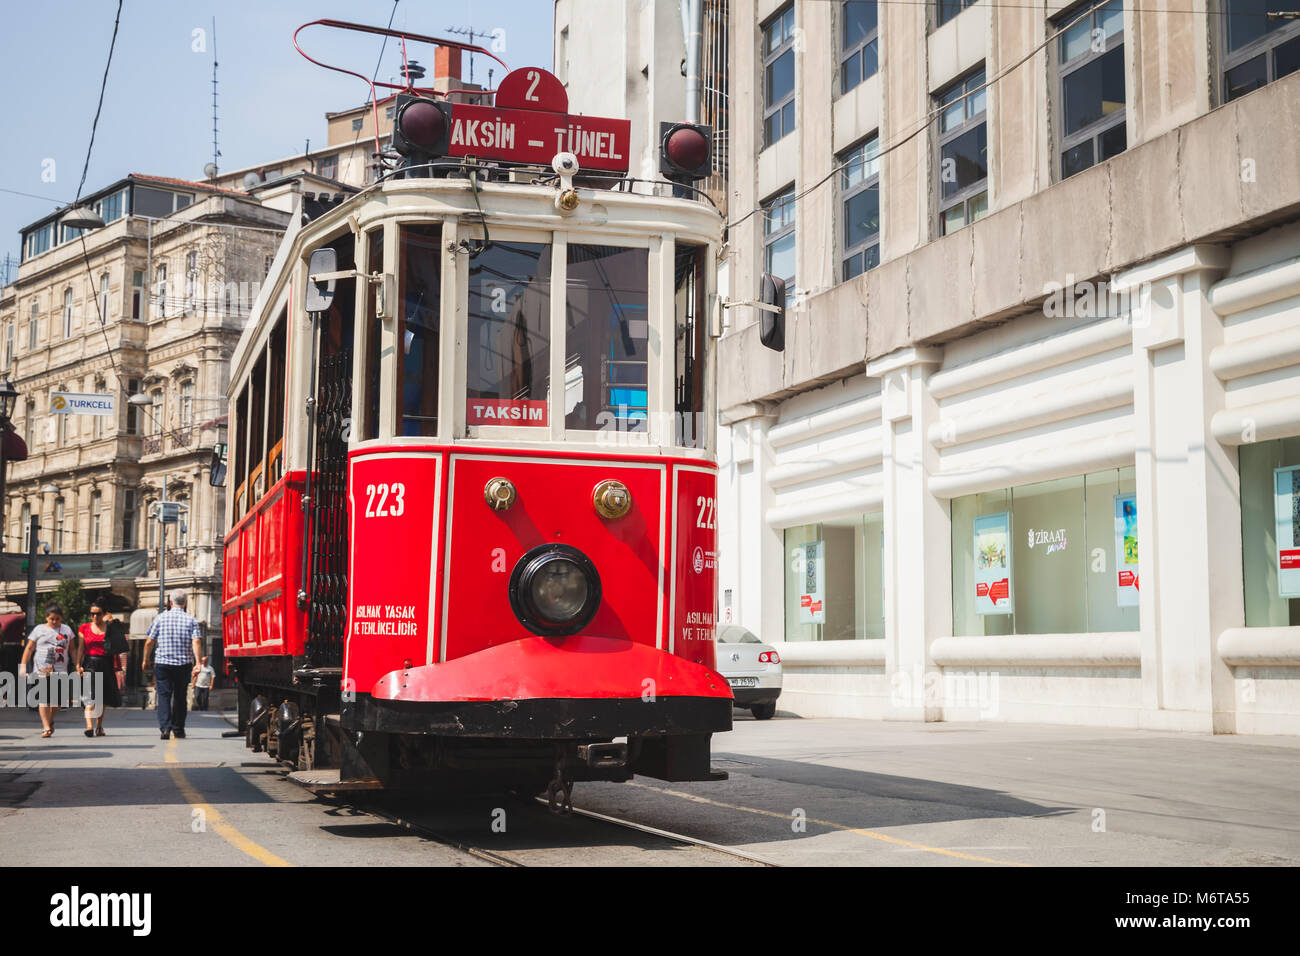 Istanbul, Turkey - July 1, 2016: Traditional red tram on street in Istanbul, ordinary people walk on street Stock Photo